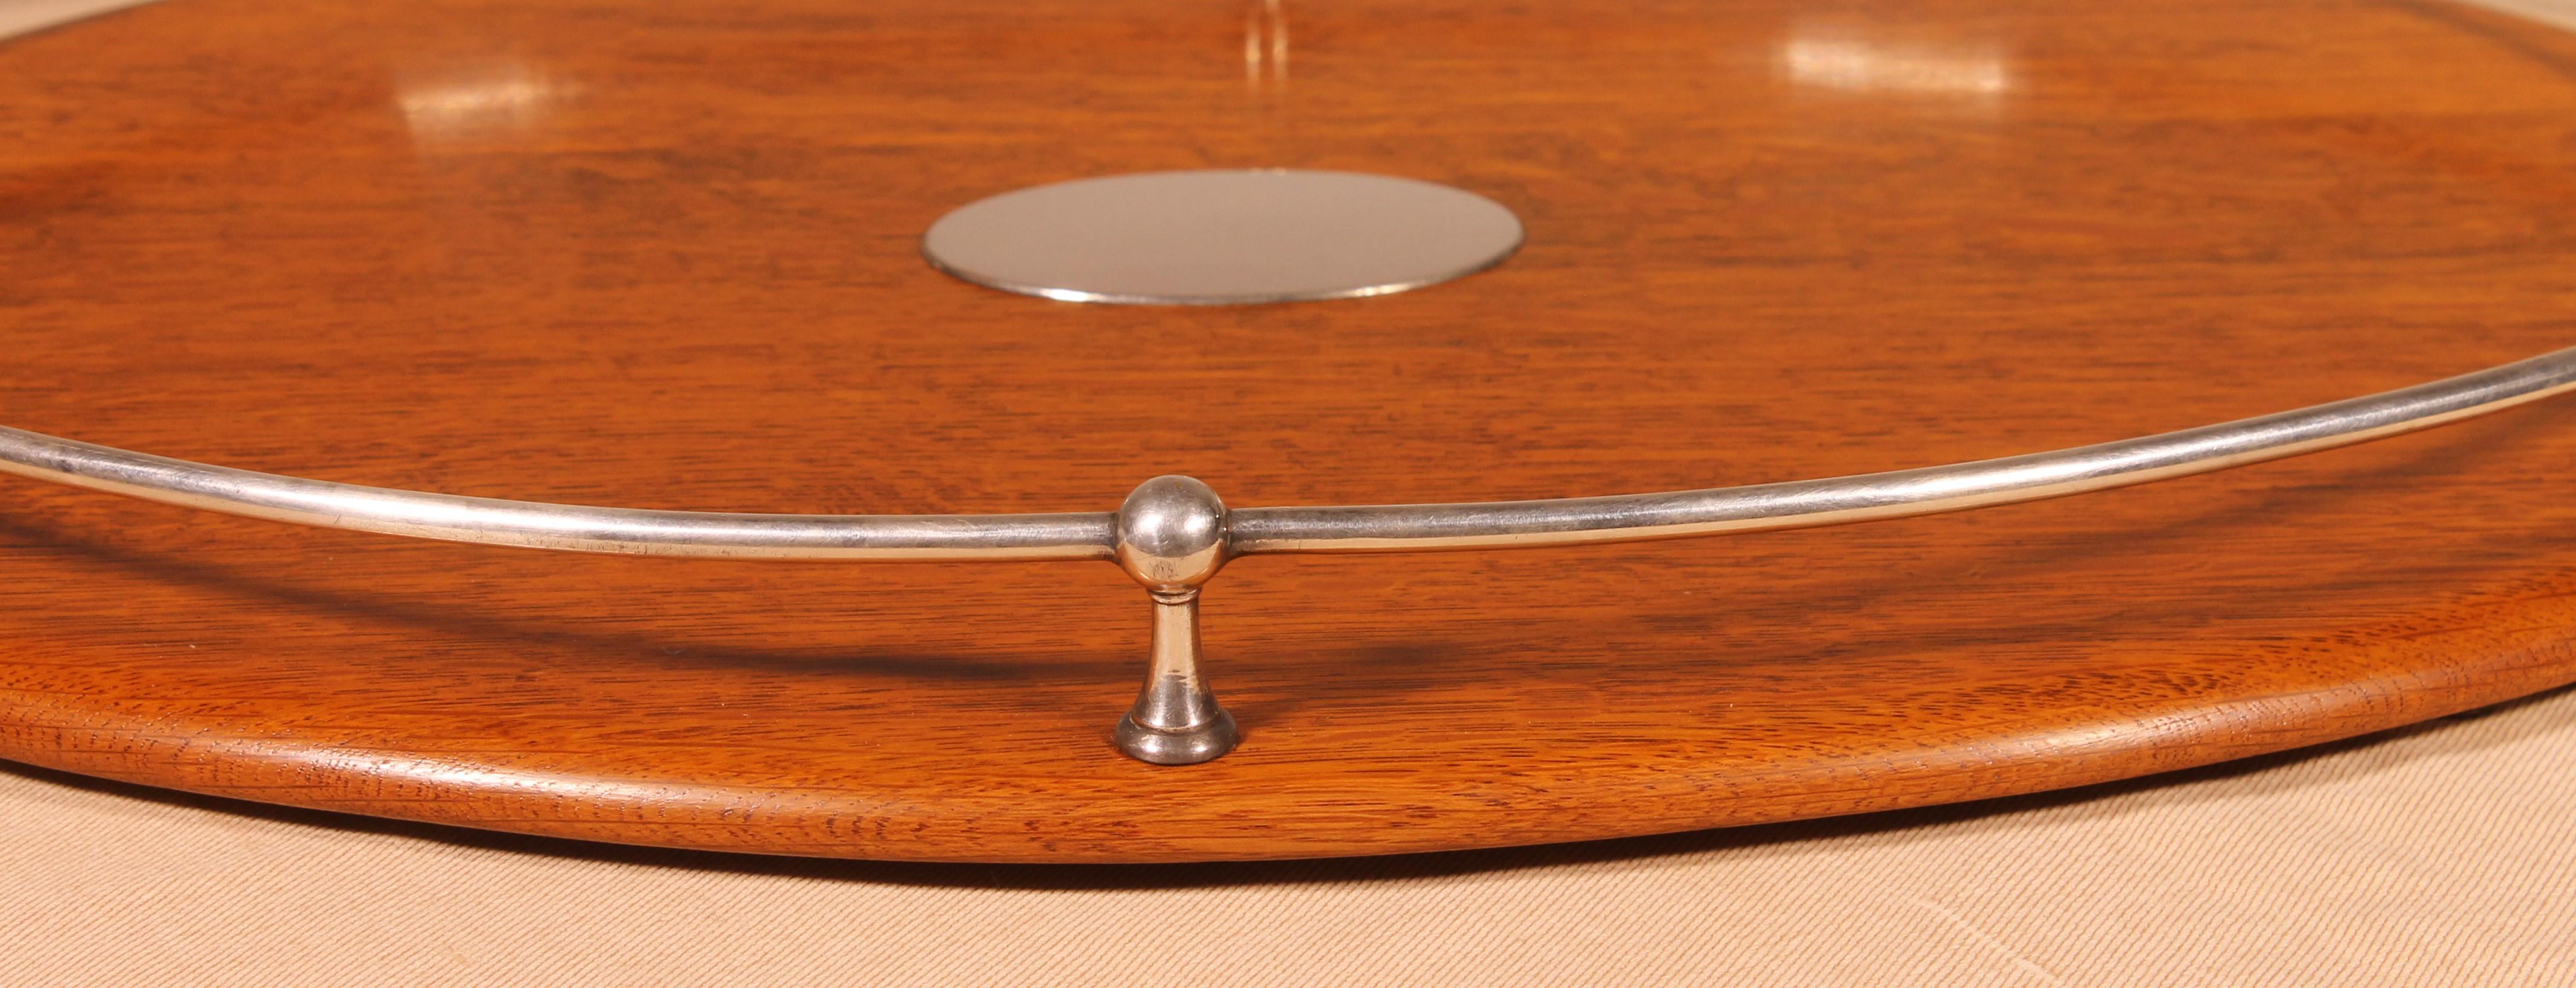 lovely tray in oak and silver plated metal from the 19th century from England
light oak witch is unusual and makes it a modern touch

Very beautiful oval model with  beautiful proportions
In superb condition and beautiful patina of the oak
